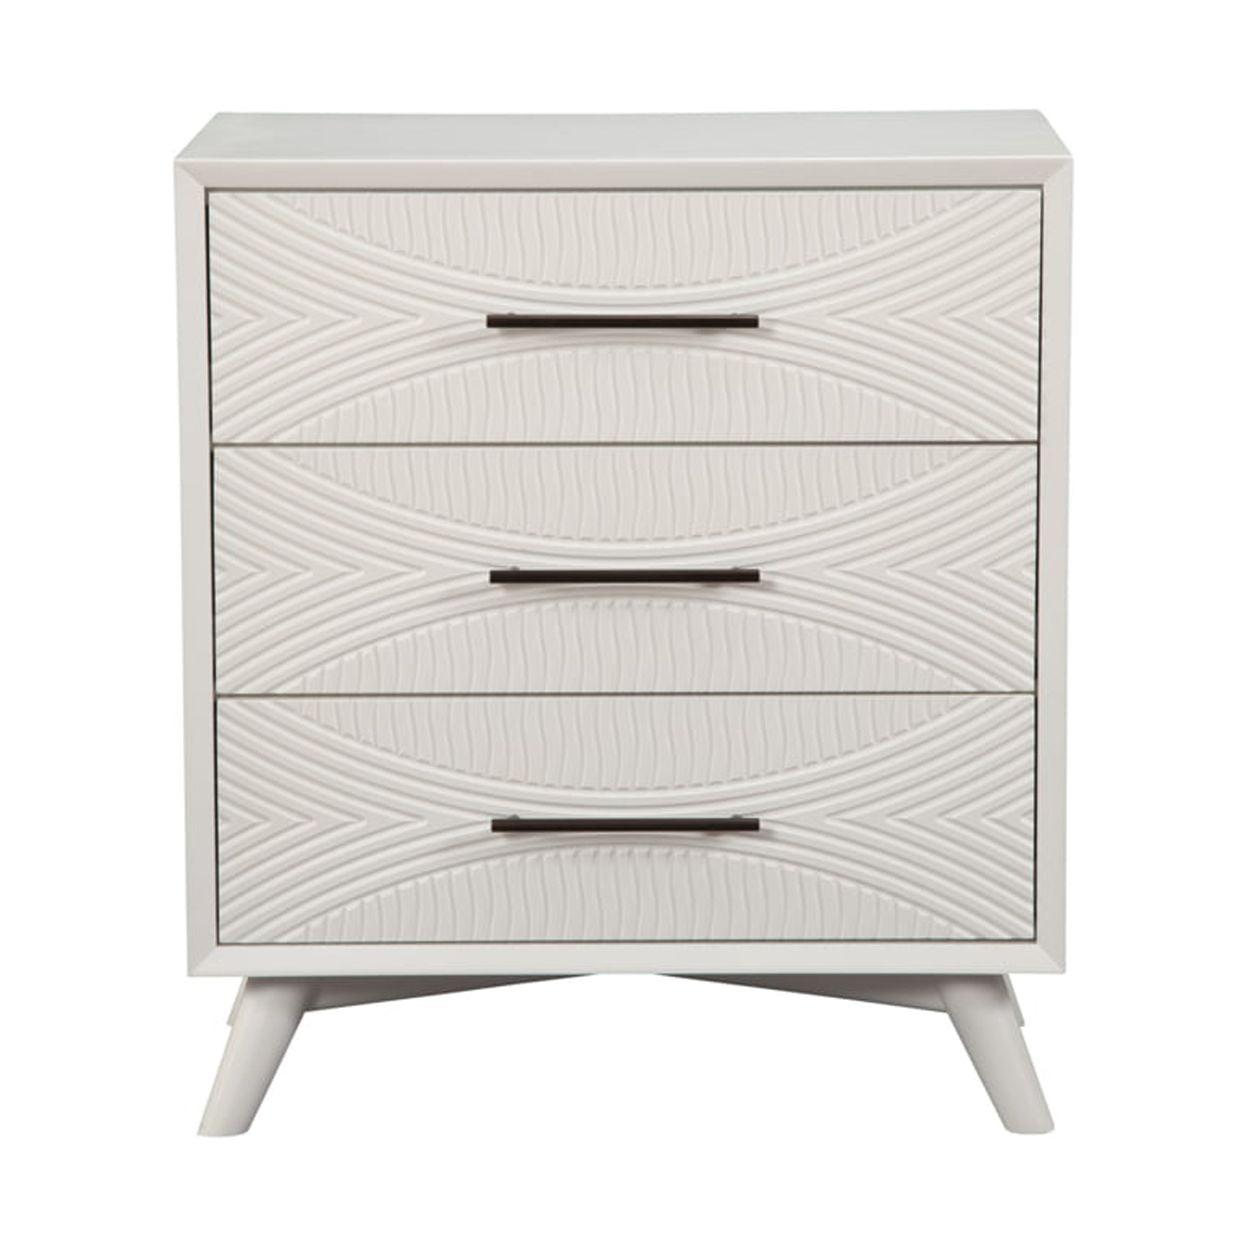 White Mahogany Wood 3-Drawer Chest with Felt Lined Drawers